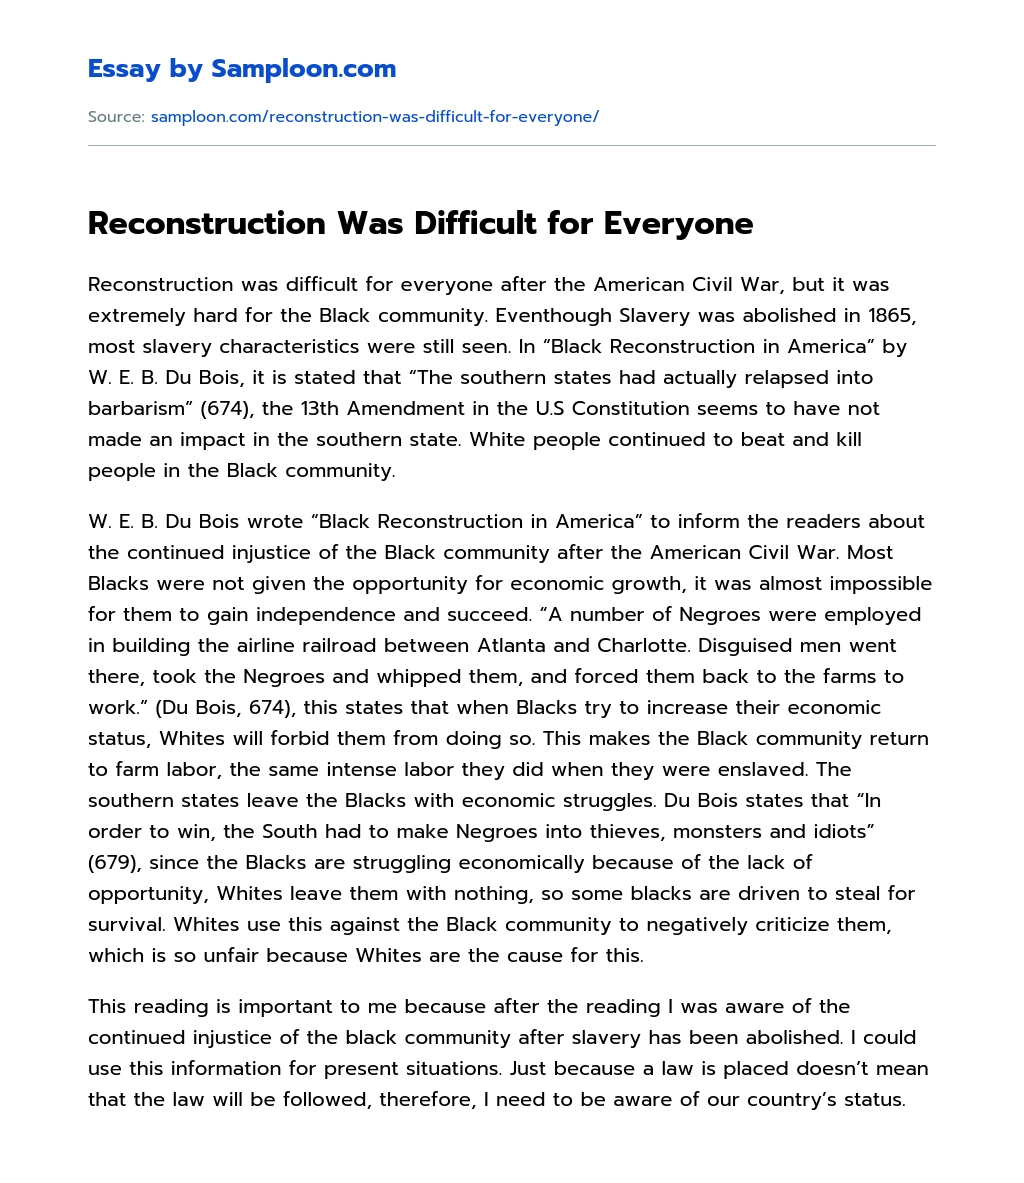 Reconstruction Was Difficult for Everyone essay